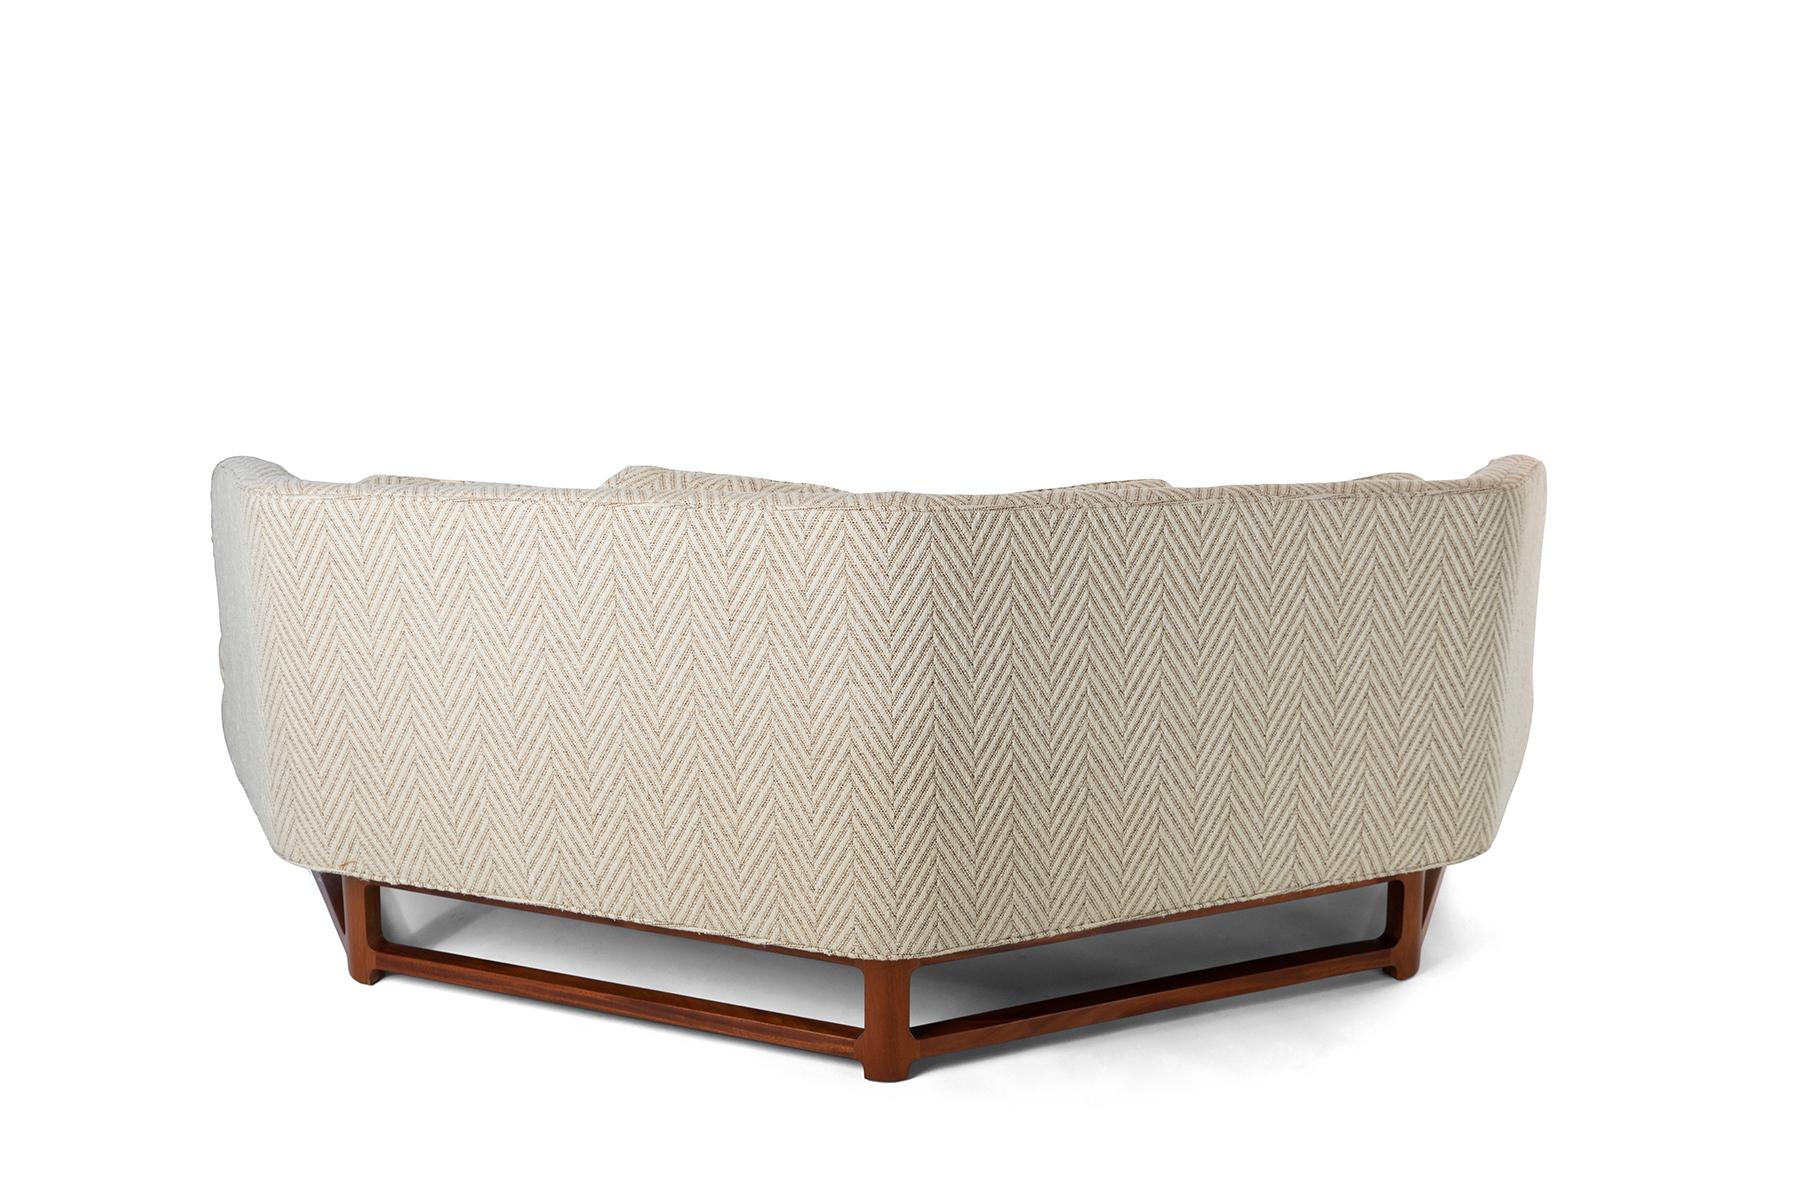 Janus sofa designed by Edward Wormley for Dunbar circa early 1950's. The light cream colored herringbone upholstery is original and in incredible condition. The solid mahogany base has been refinished.